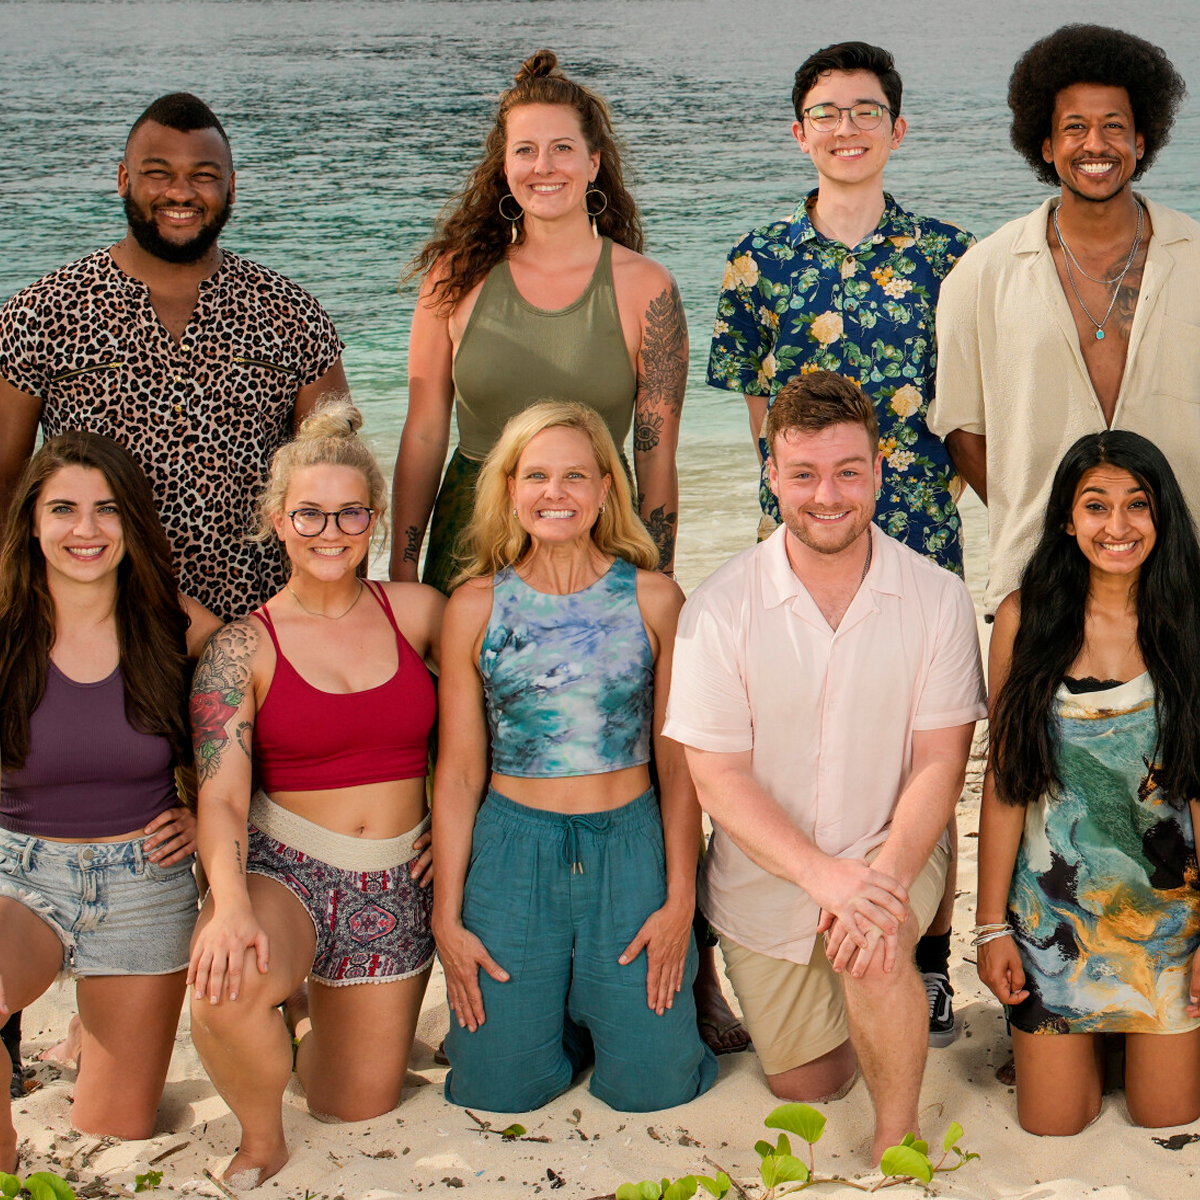 How Long Are 'Survivor' Contestants on the Island?